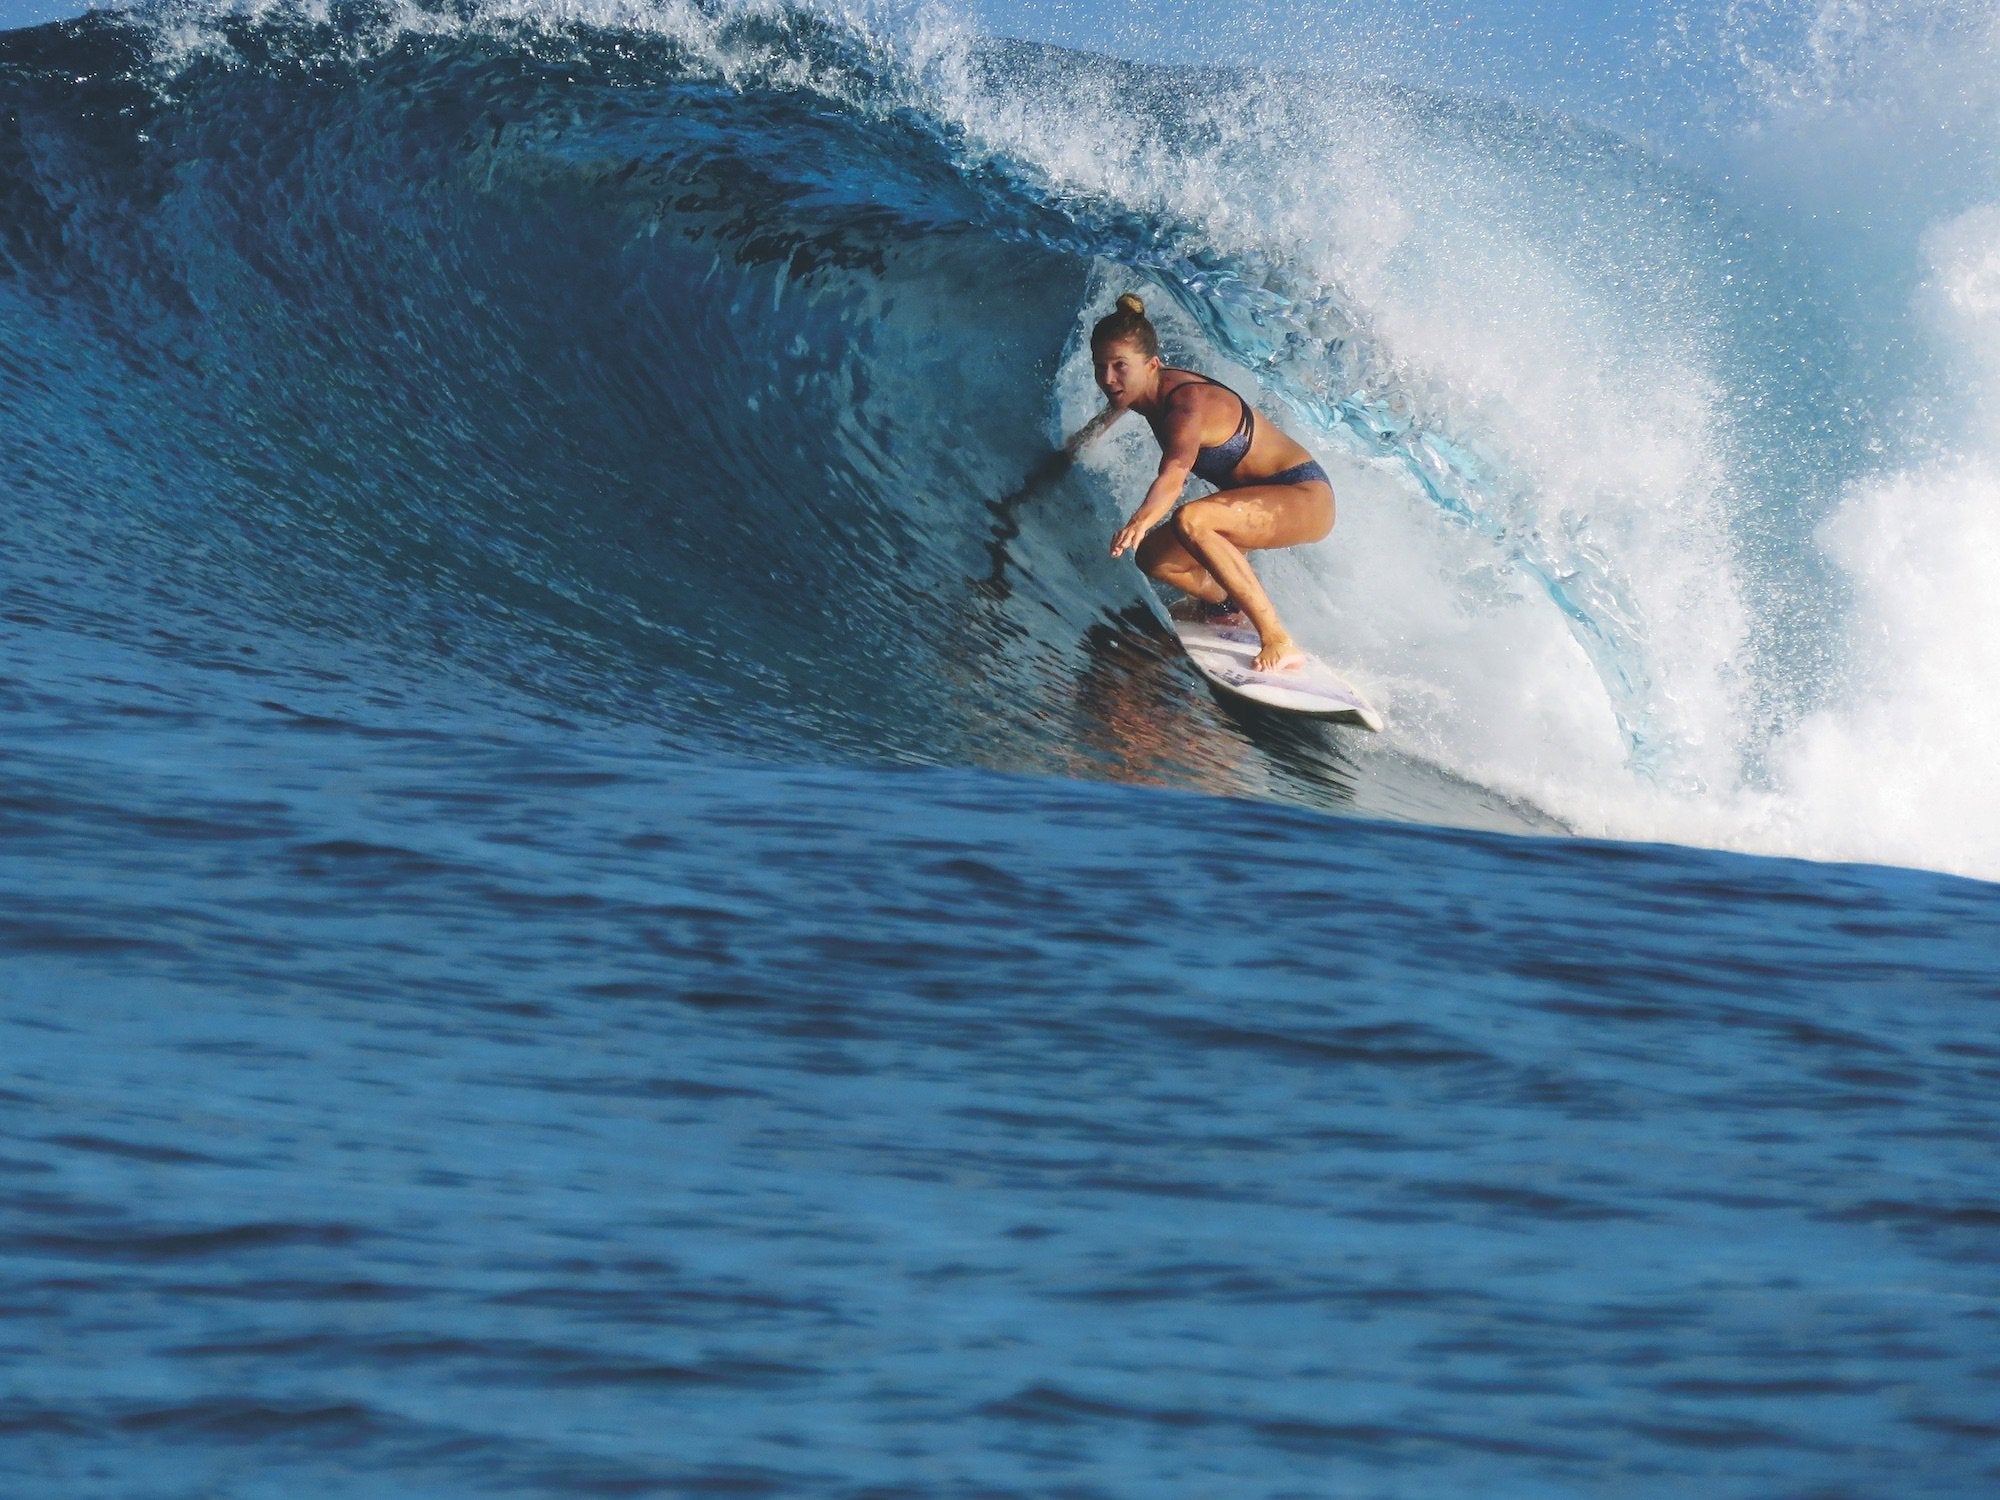 She Surf - The Rise of Female Surfing